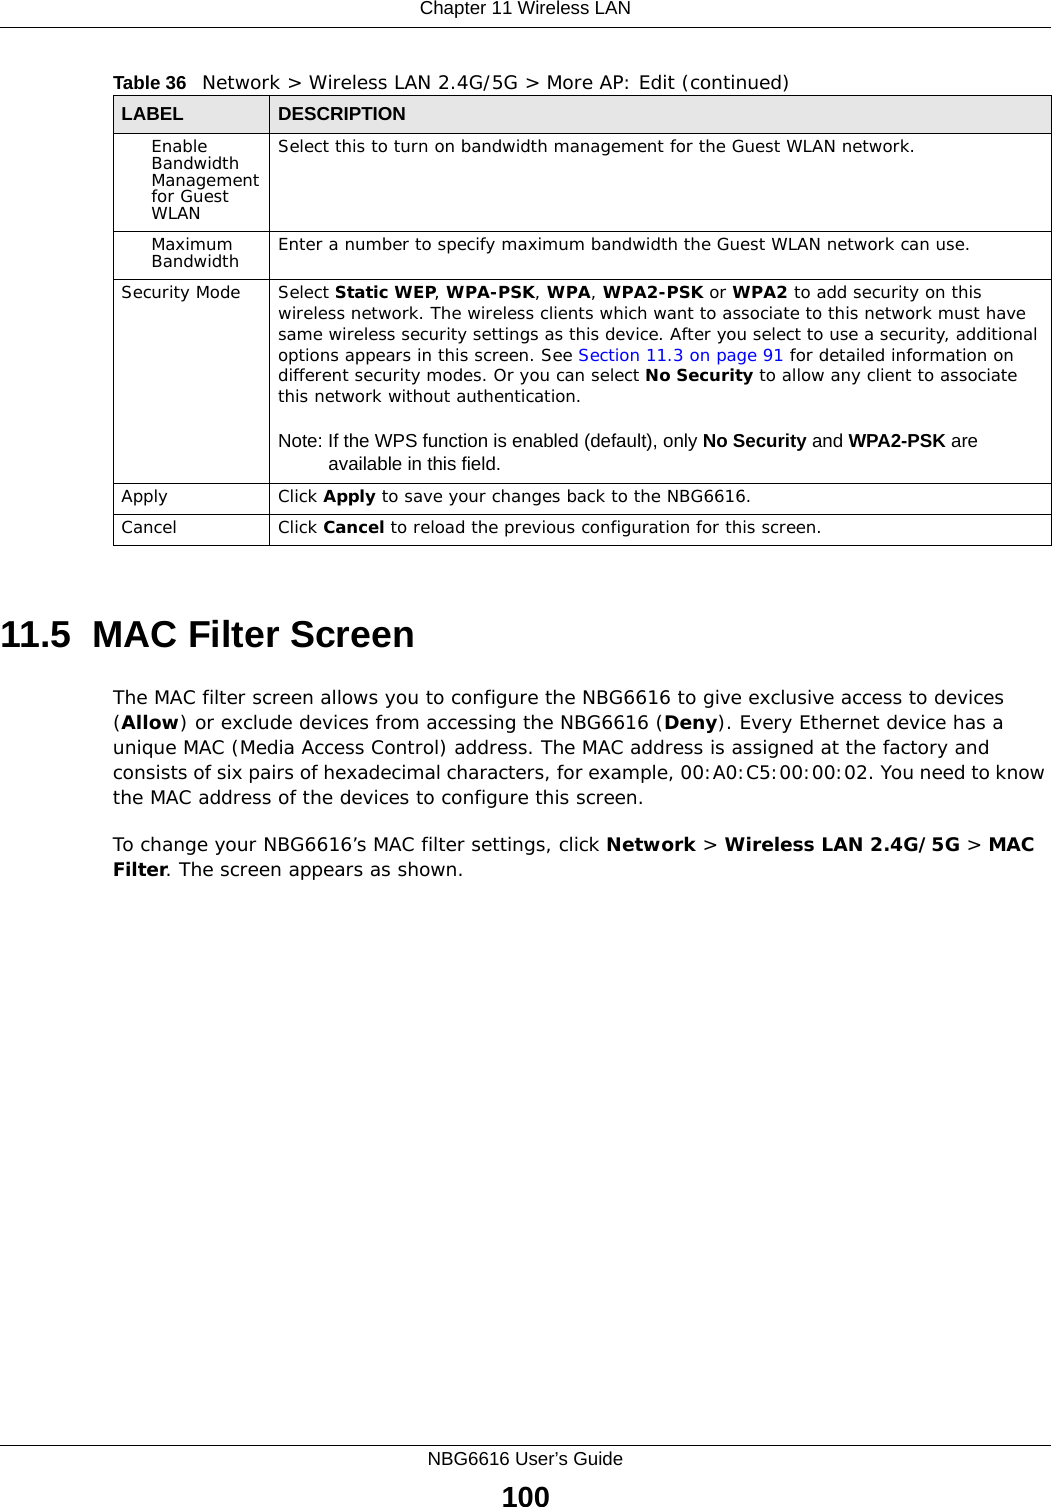 Chapter 11 Wireless LANNBG6616 User’s Guide10011.5  MAC Filter Screen The MAC filter screen allows you to configure the NBG6616 to give exclusive access to devices (Allow) or exclude devices from accessing the NBG6616 (Deny). Every Ethernet device has a unique MAC (Media Access Control) address. The MAC address is assigned at the factory and consists of six pairs of hexadecimal characters, for example, 00:A0:C5:00:00:02. You need to know the MAC address of the devices to configure this screen.To change your NBG6616’s MAC filter settings, click Network &gt; Wireless LAN 2.4G/5G &gt; MAC Filter. The screen appears as shown.Enable Bandwidth Management for Guest WLAN Select this to turn on bandwidth management for the Guest WLAN network.Maximum Bandwidth  Enter a number to specify maximum bandwidth the Guest WLAN network can use.Security Mode Select Static WEP, WPA-PSK, WPA, WPA2-PSK or WPA2 to add security on this wireless network. The wireless clients which want to associate to this network must have same wireless security settings as this device. After you select to use a security, additional options appears in this screen. See Section 11.3 on page 91 for detailed information on different security modes. Or you can select No Security to allow any client to associate this network without authentication.Note: If the WPS function is enabled (default), only No Security and WPA2-PSK are available in this field.Apply Click Apply to save your changes back to the NBG6616.Cancel Click Cancel to reload the previous configuration for this screen.Table 36   Network &gt; Wireless LAN 2.4G/5G &gt; More AP: Edit (continued)LABEL DESCRIPTION